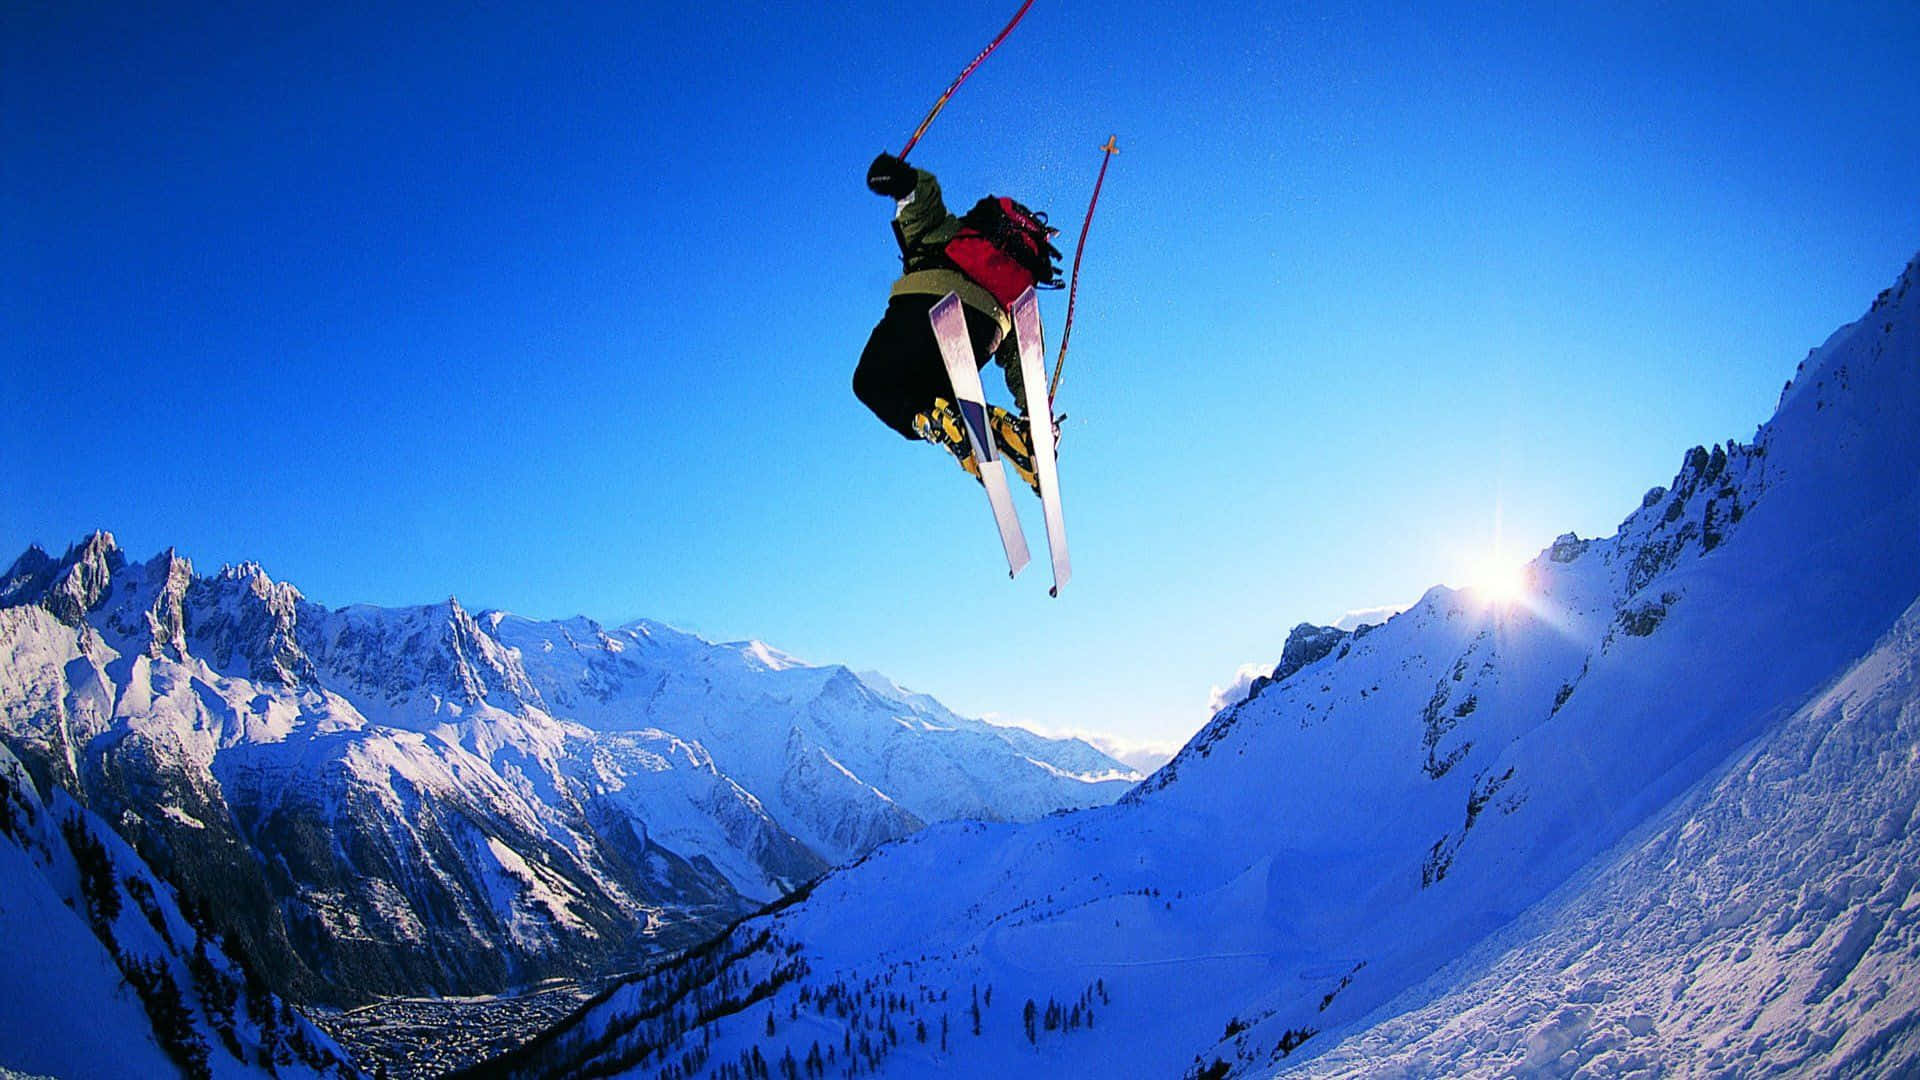 Action-packed Winter Sports Scene Wallpaper